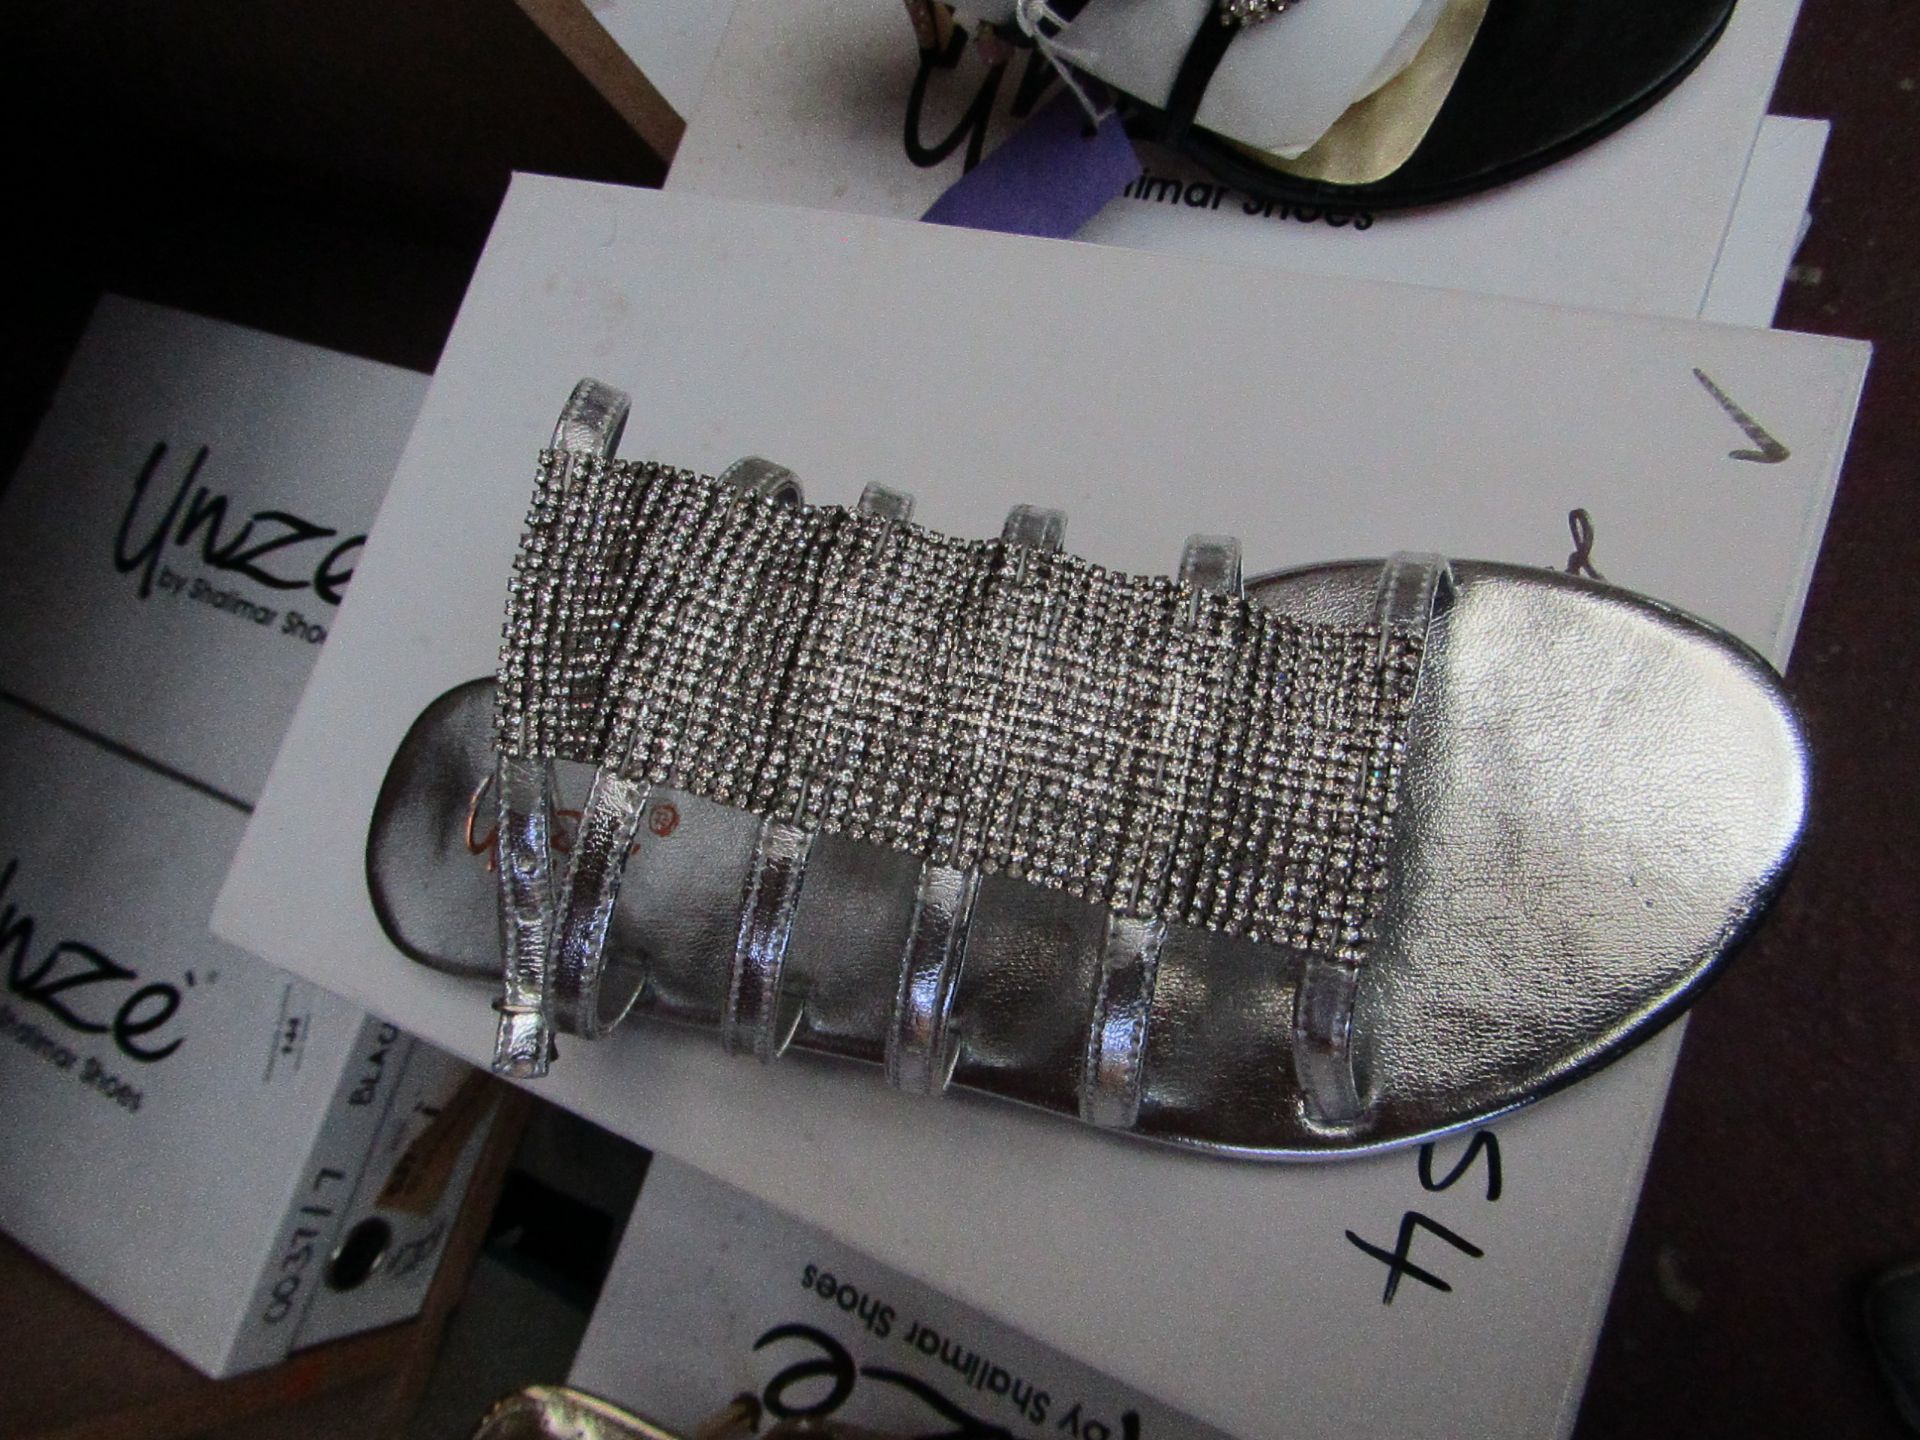 Unze by Shalamar Shoes Ladies Silver & Embellished Shoes size 3 new & boxed see image for design